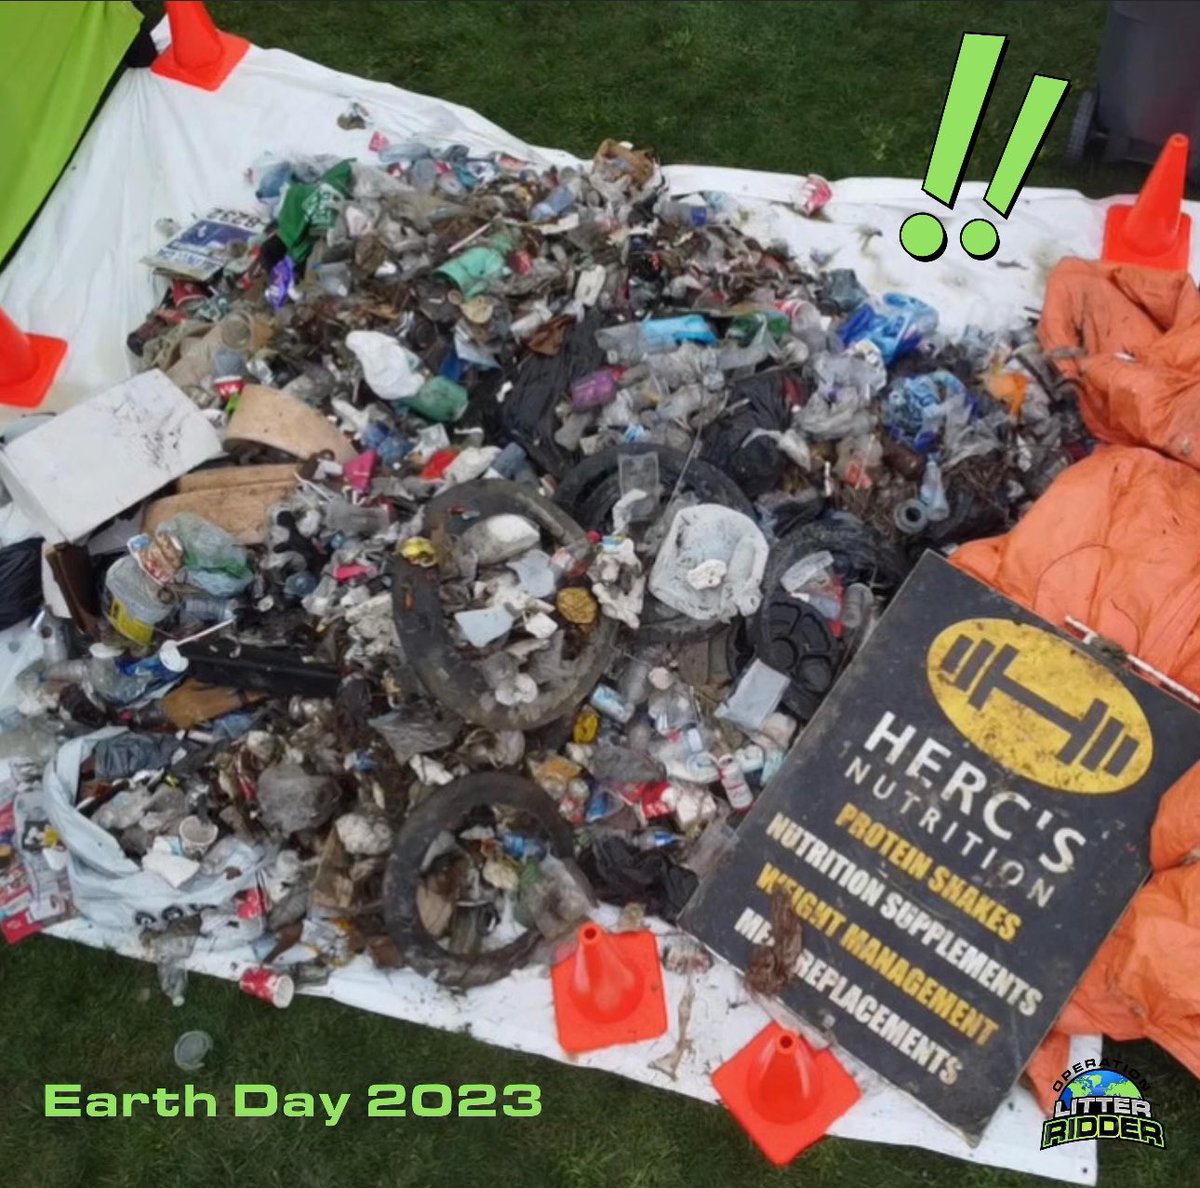 Check out last years haul from Earth Day 2023 🤩🙌

We successfully did a clean up event with ALL re-useable material! 👏

Our plan is to have an even BIGGER haul this year. Keep an eye out for our Earth Day event 👀
#litterpicking
#vaughanlitter
#earthdayevent2024
#littercleanup